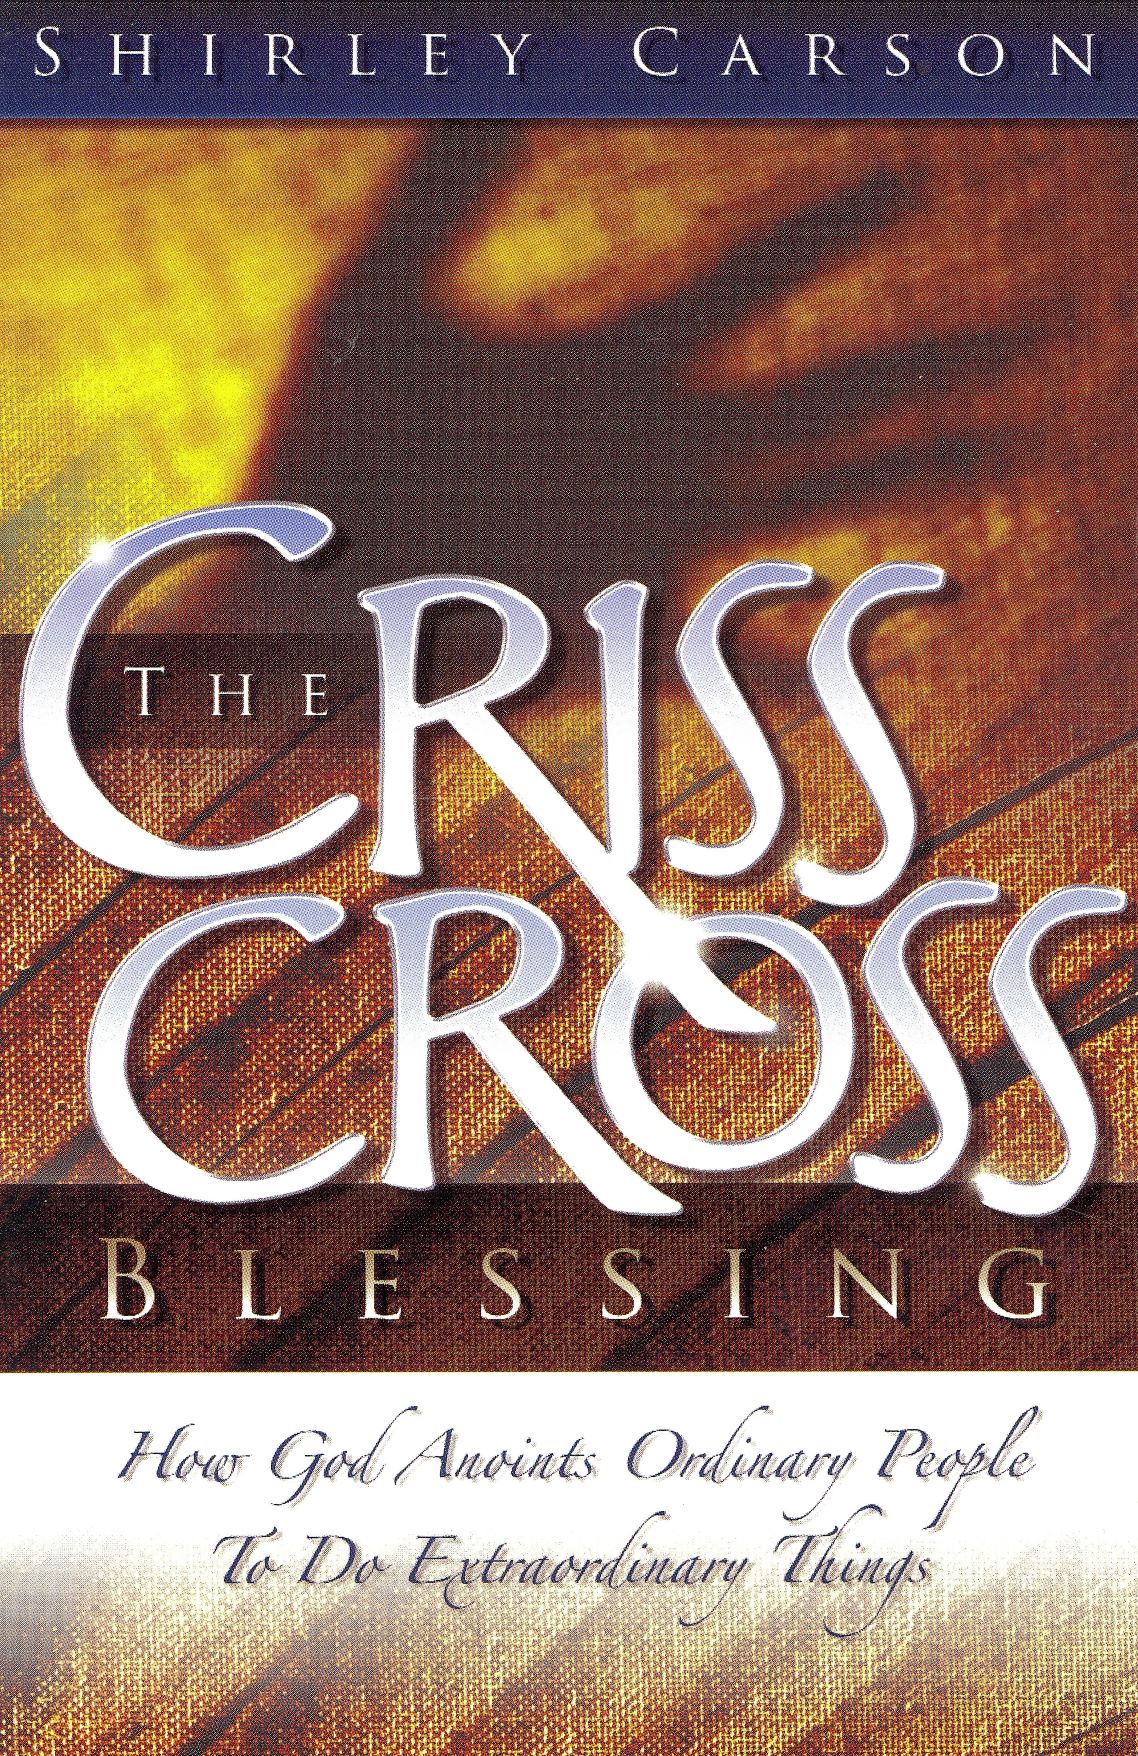 The Criss Cross Blessing - Shirley Carson